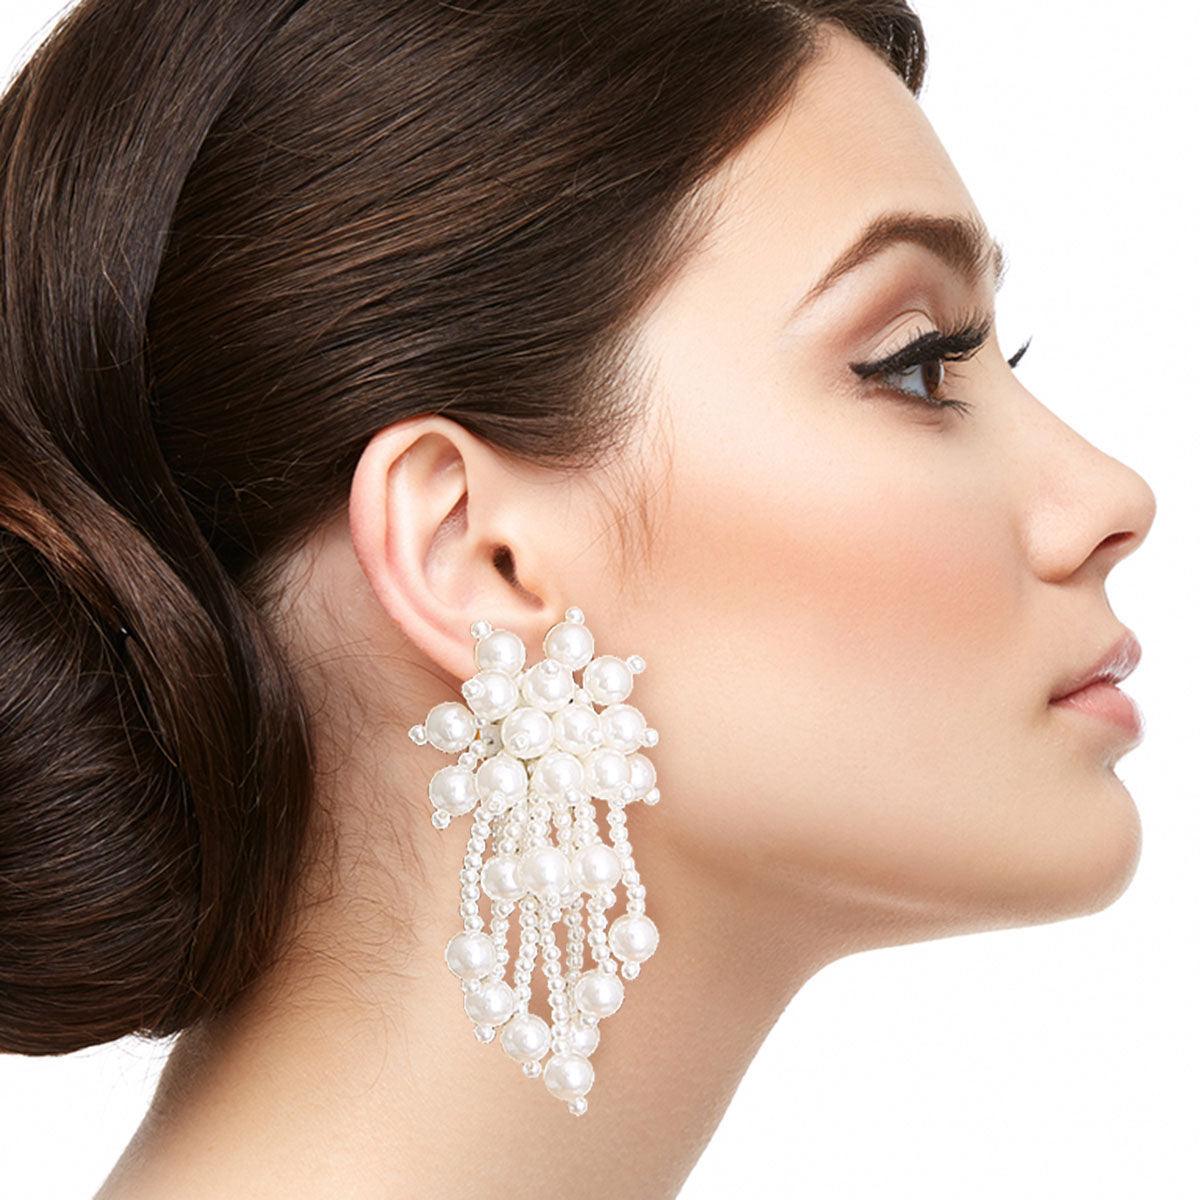 Chic Cream Cluster Drop Pearl Earrings - Make a Bold Statement with Timeless Elegance